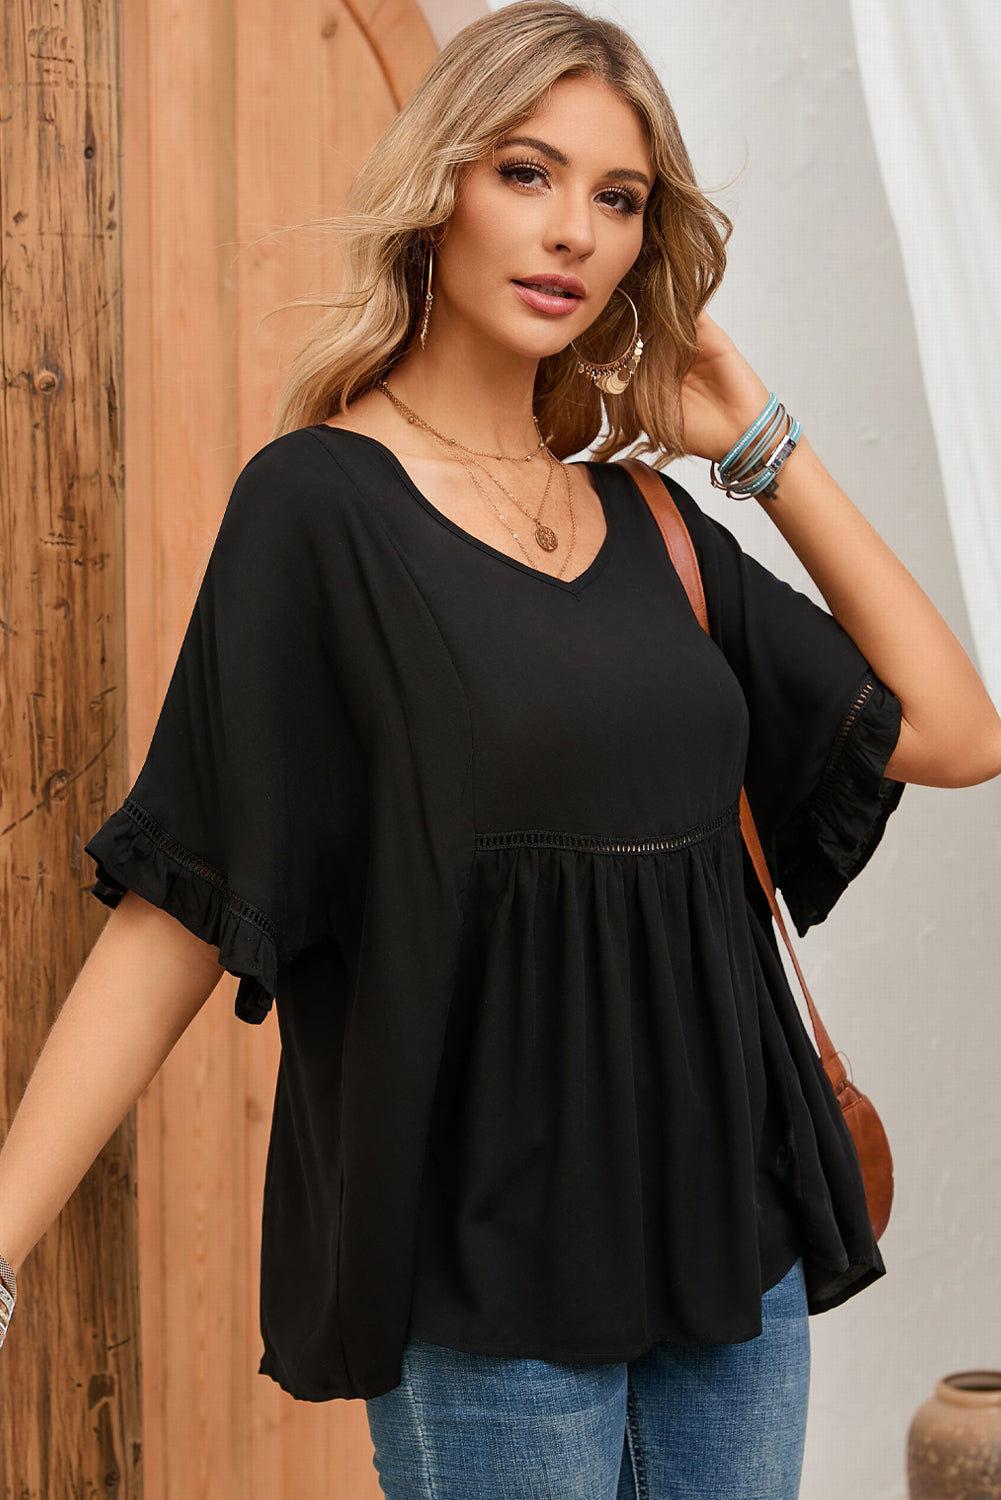 Apricot Ruffled Lace Detail Loose V Neck Top